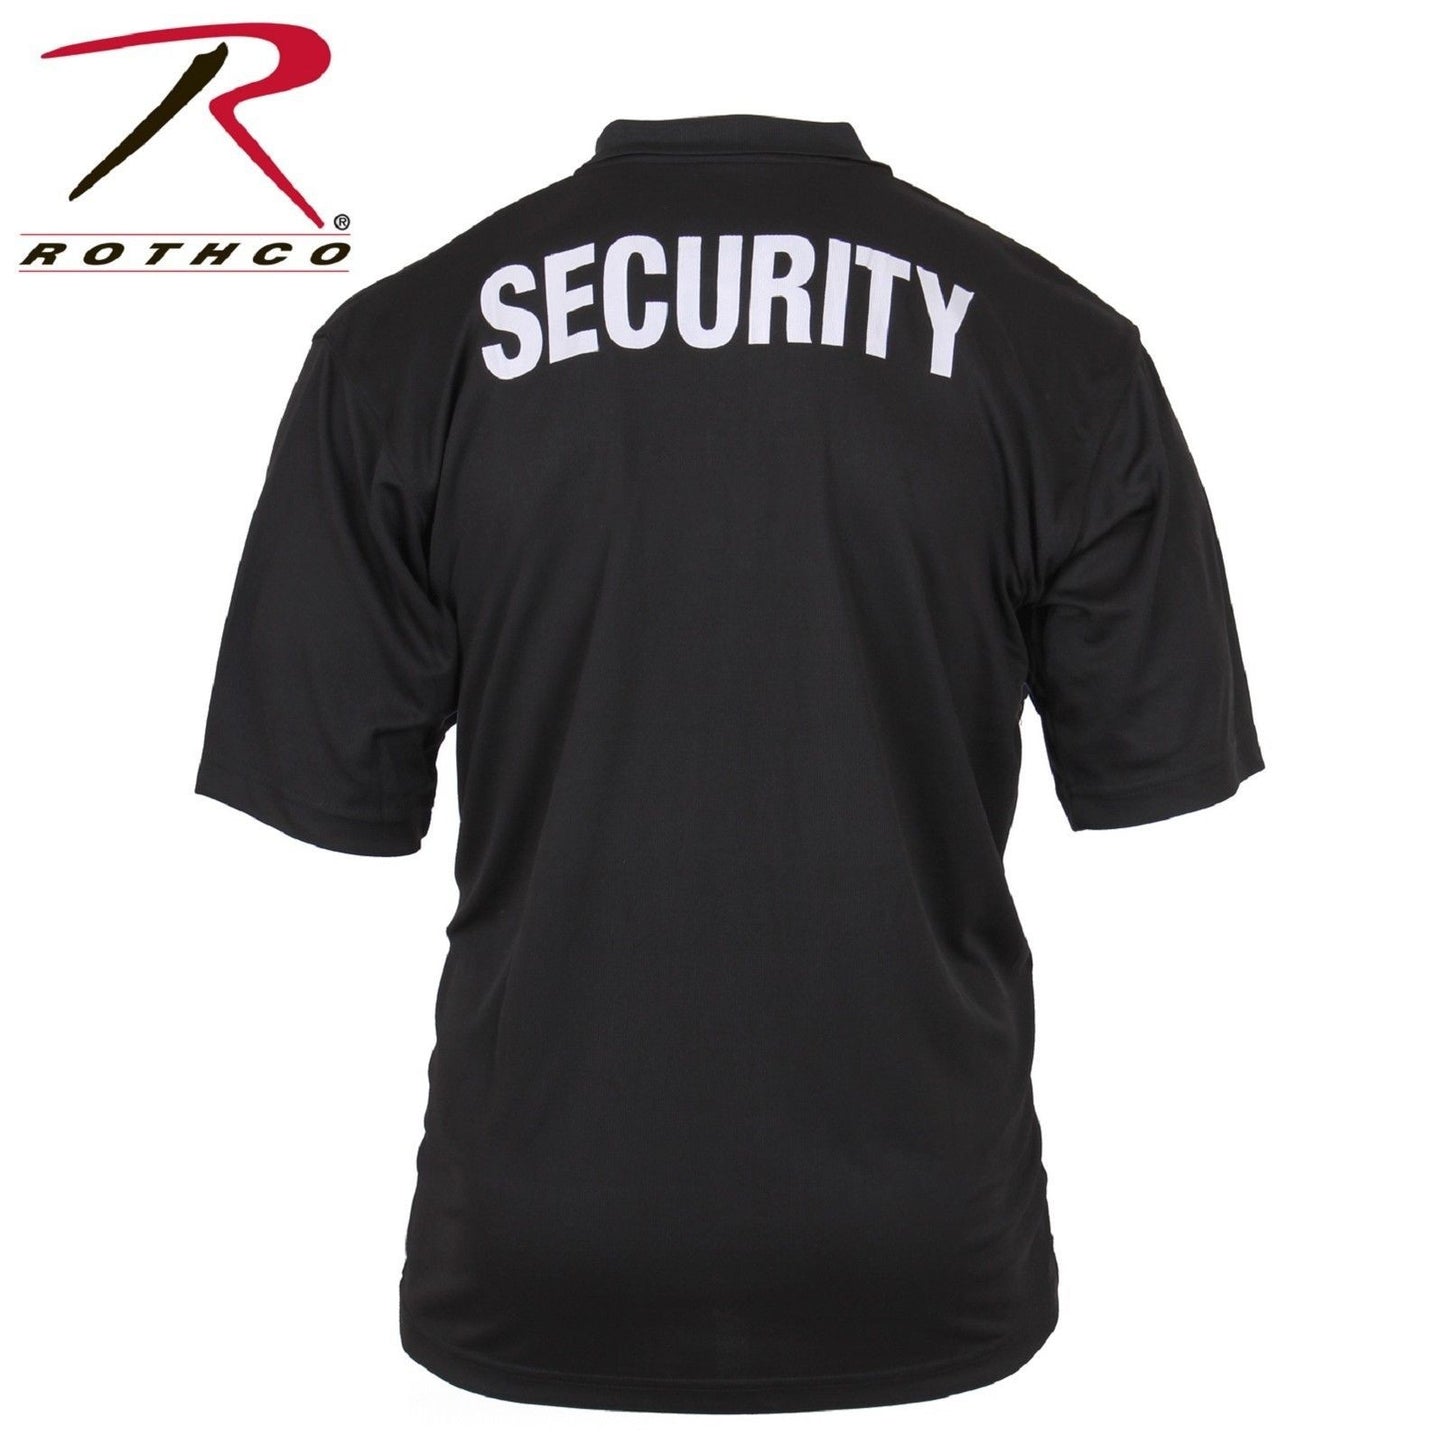 Mens Black Double Sided SECURITY Lightweight Moisture Wicking Polo Shirt